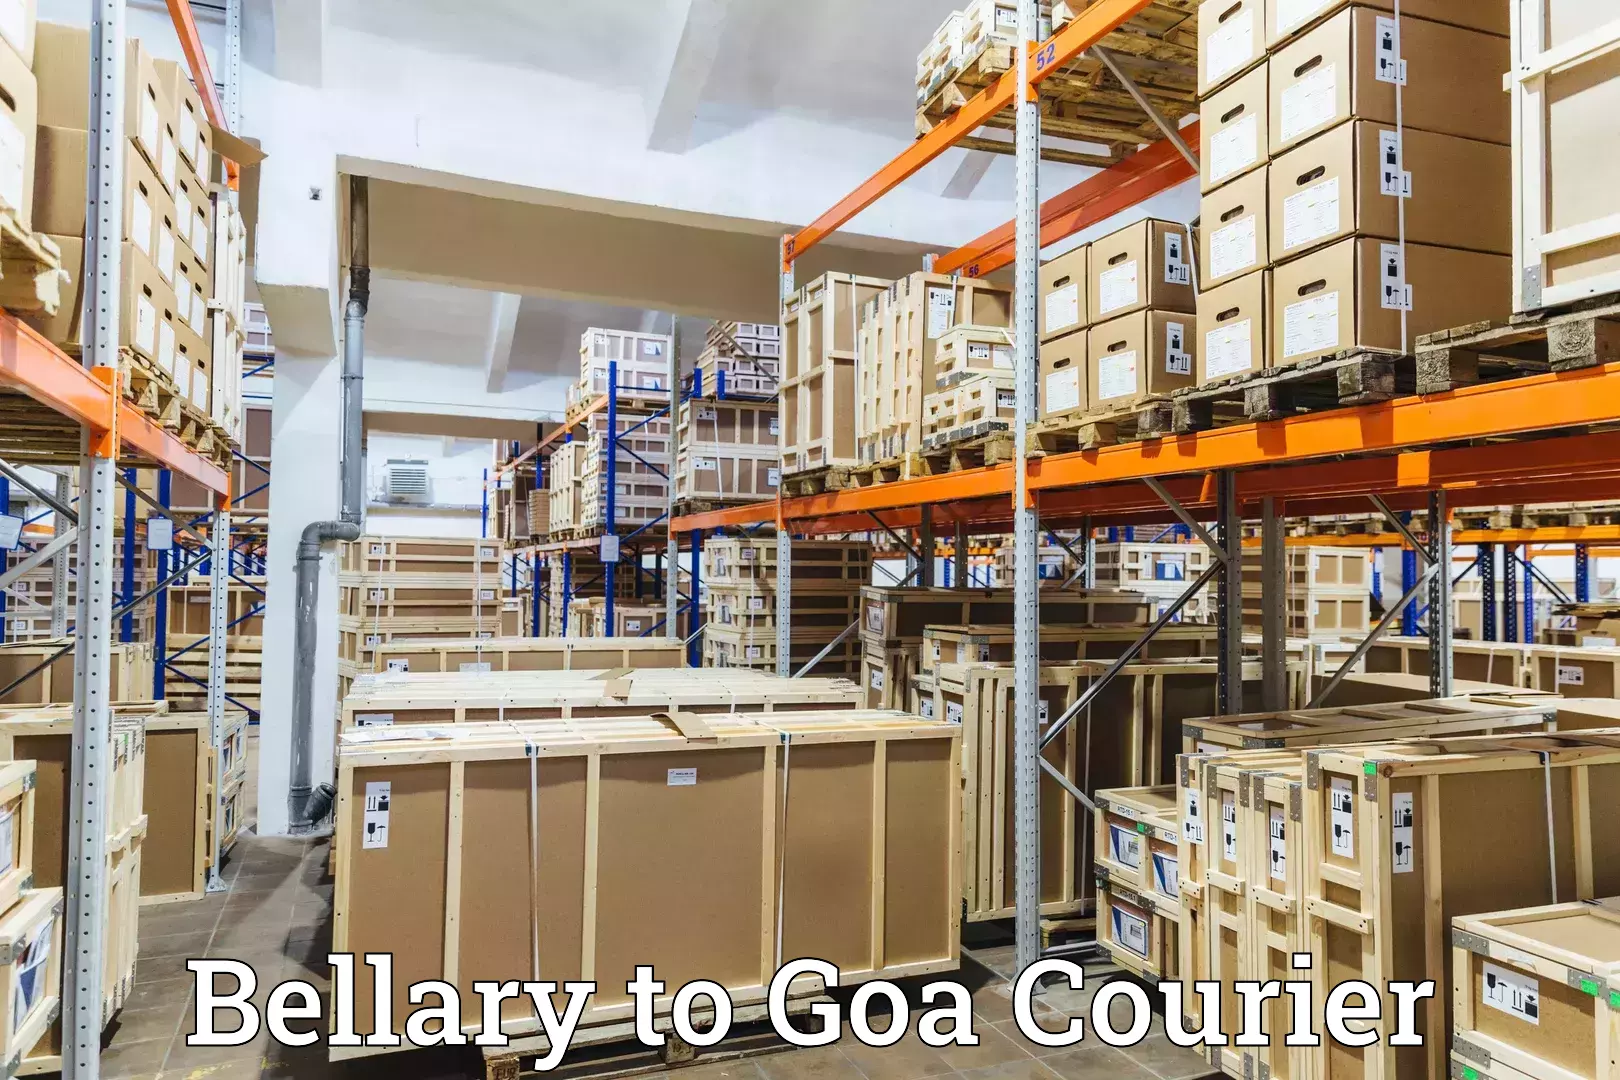 Nationwide shipping coverage Bellary to Goa